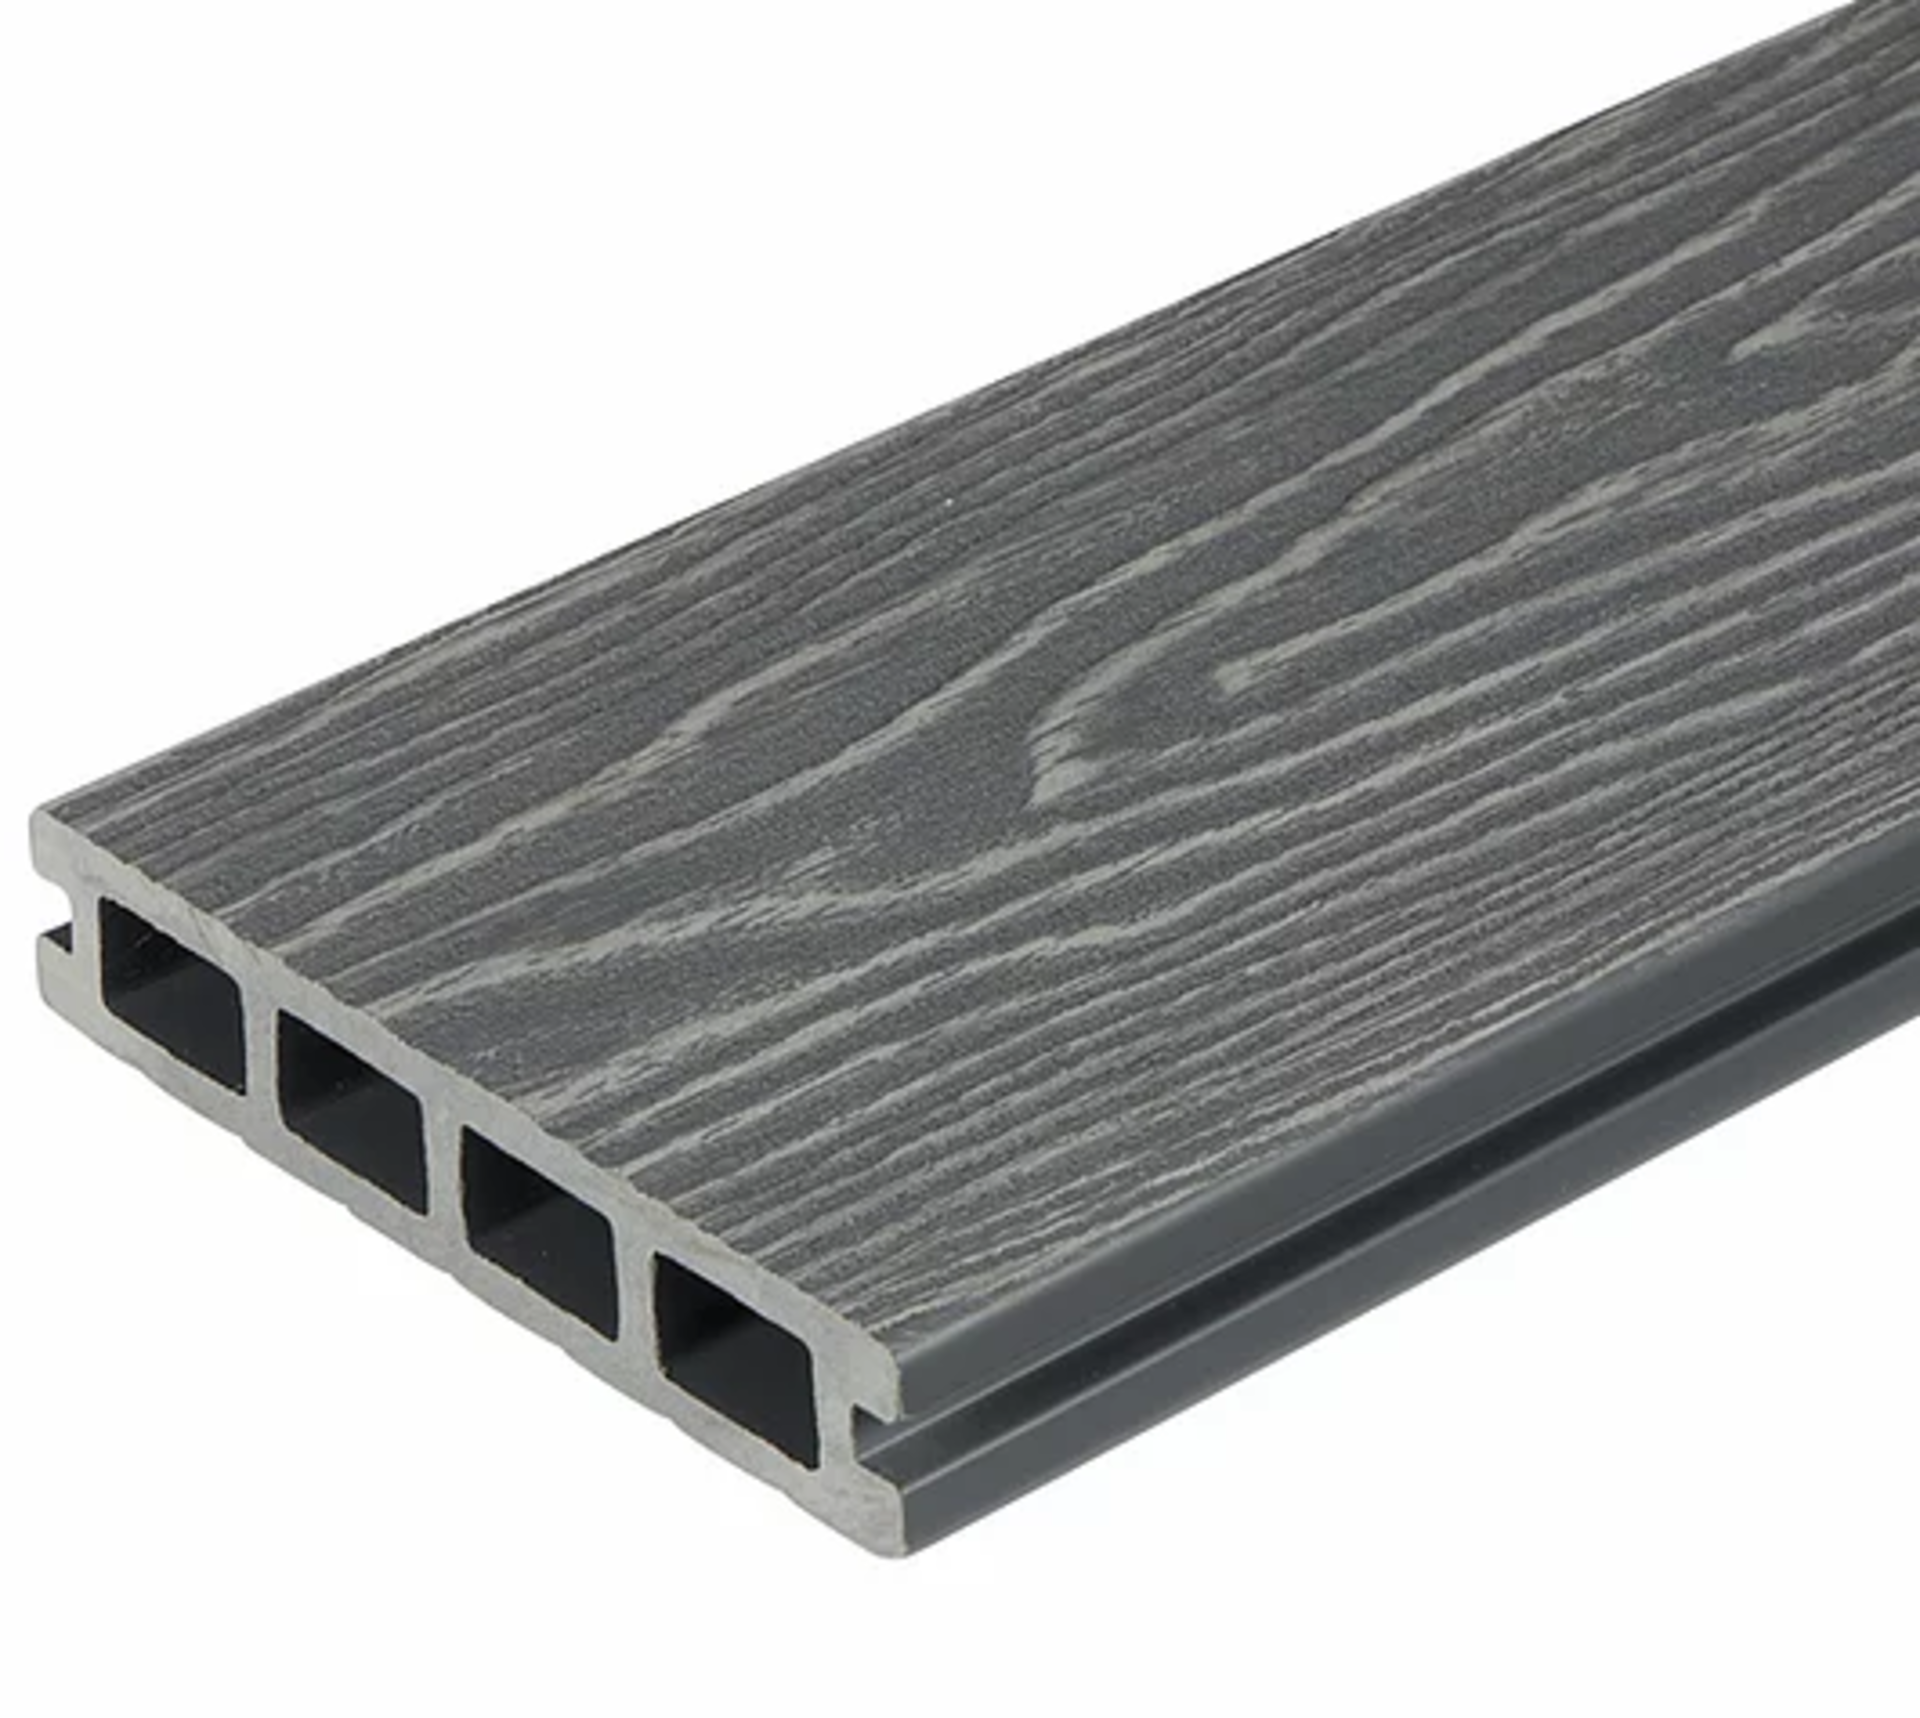 * 20 WPC Composite Light Grey Double sided Embossed Woodgrain Decking Boards 2900mm x 146mm x 25mm - Image 4 of 4